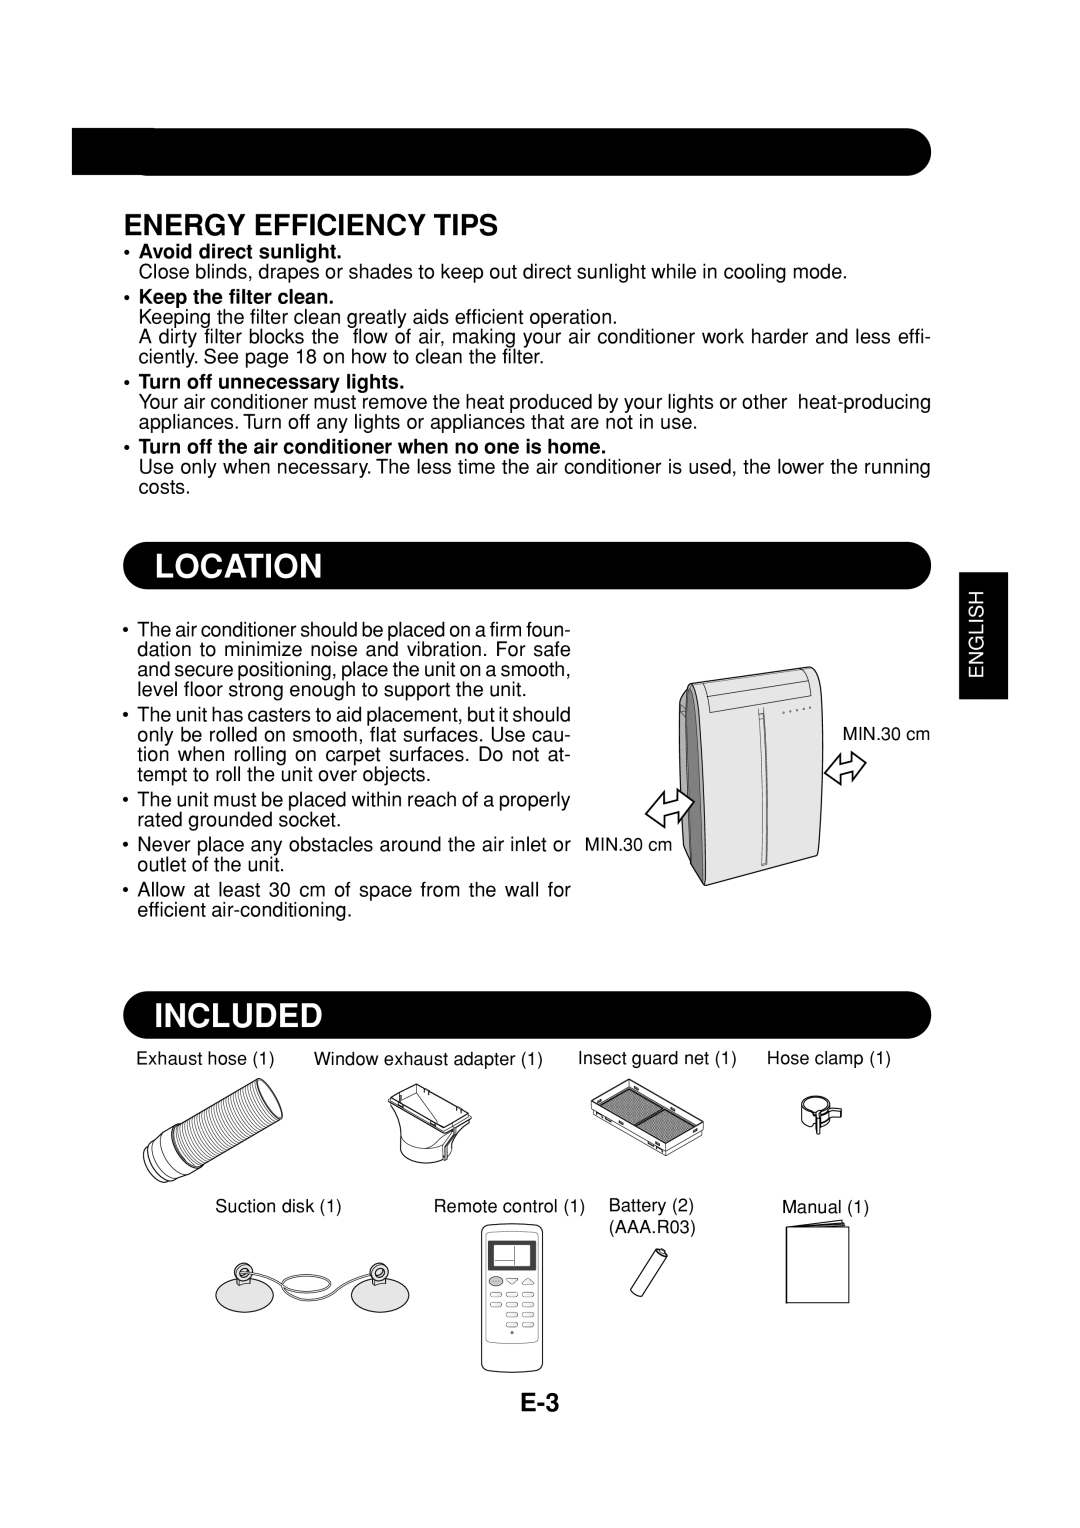 Sharp CV-P09FR operation manual Location, Included, Energy Efficiency Tips, English 